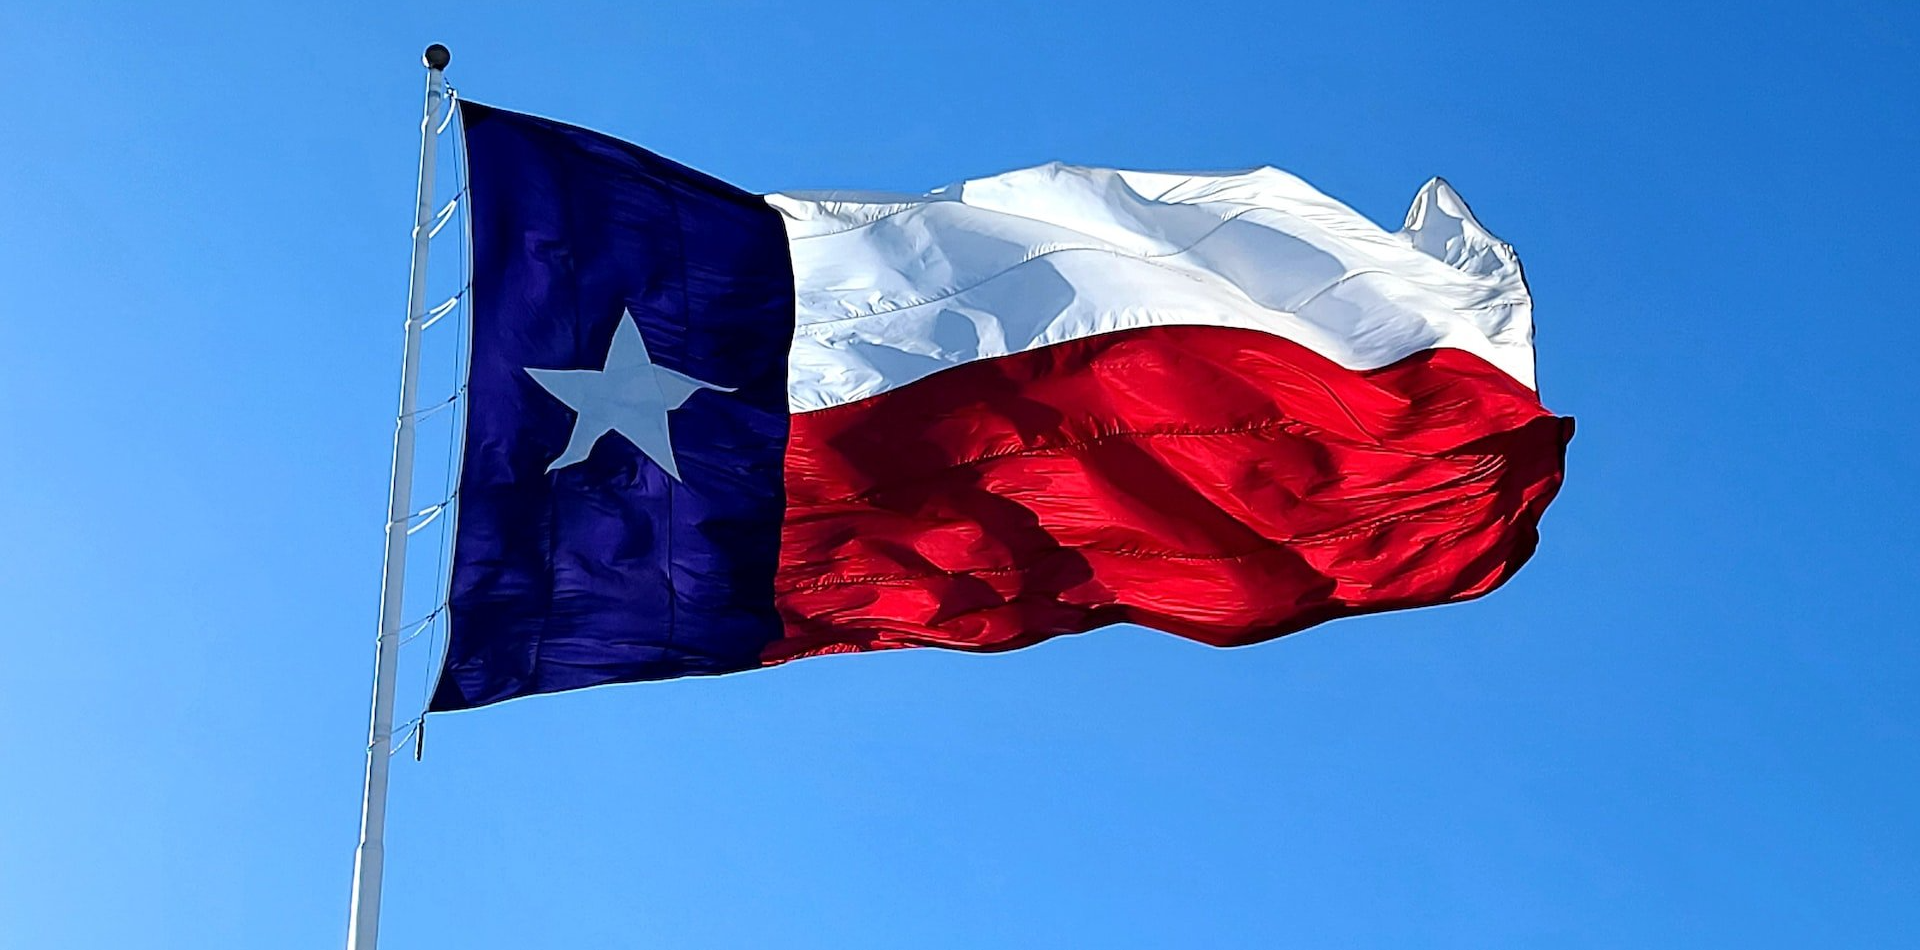 A texas flag is waving in the wind against a blue sky.